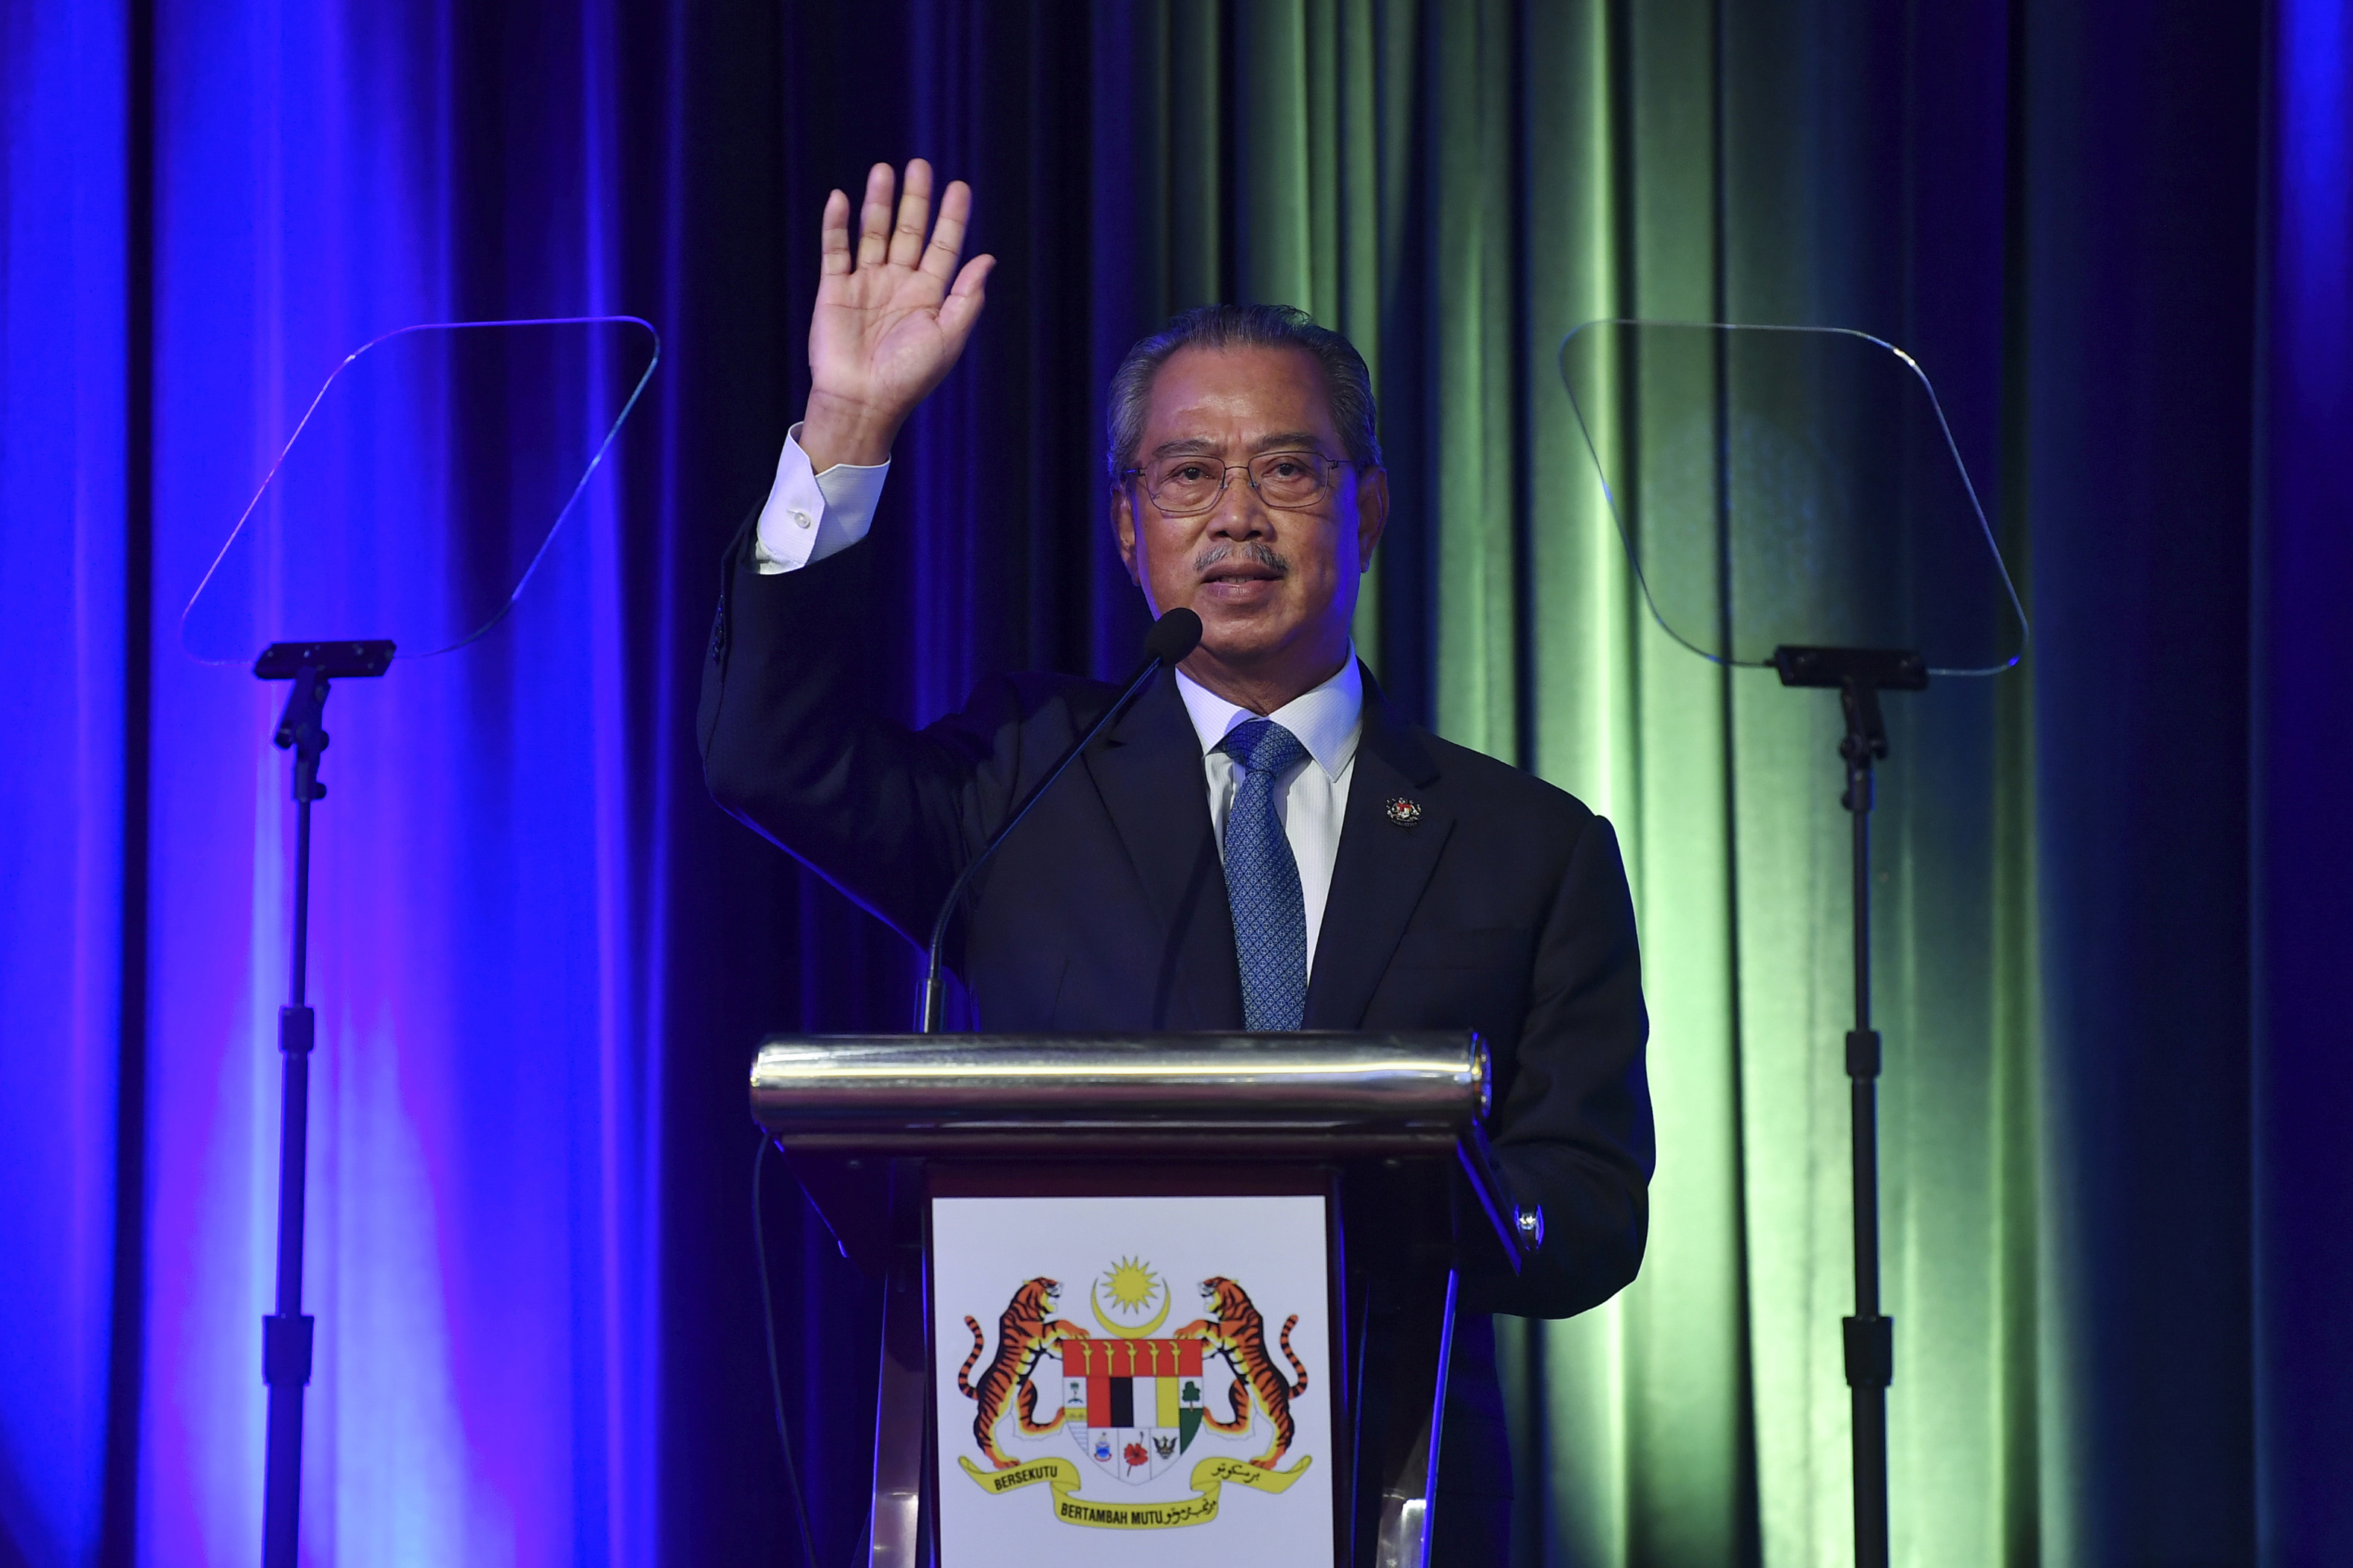 Msian Govt Announces RM40 Bln Stimulus Plus Package ‘Pemerkasa’ To Boost Economy, Help People